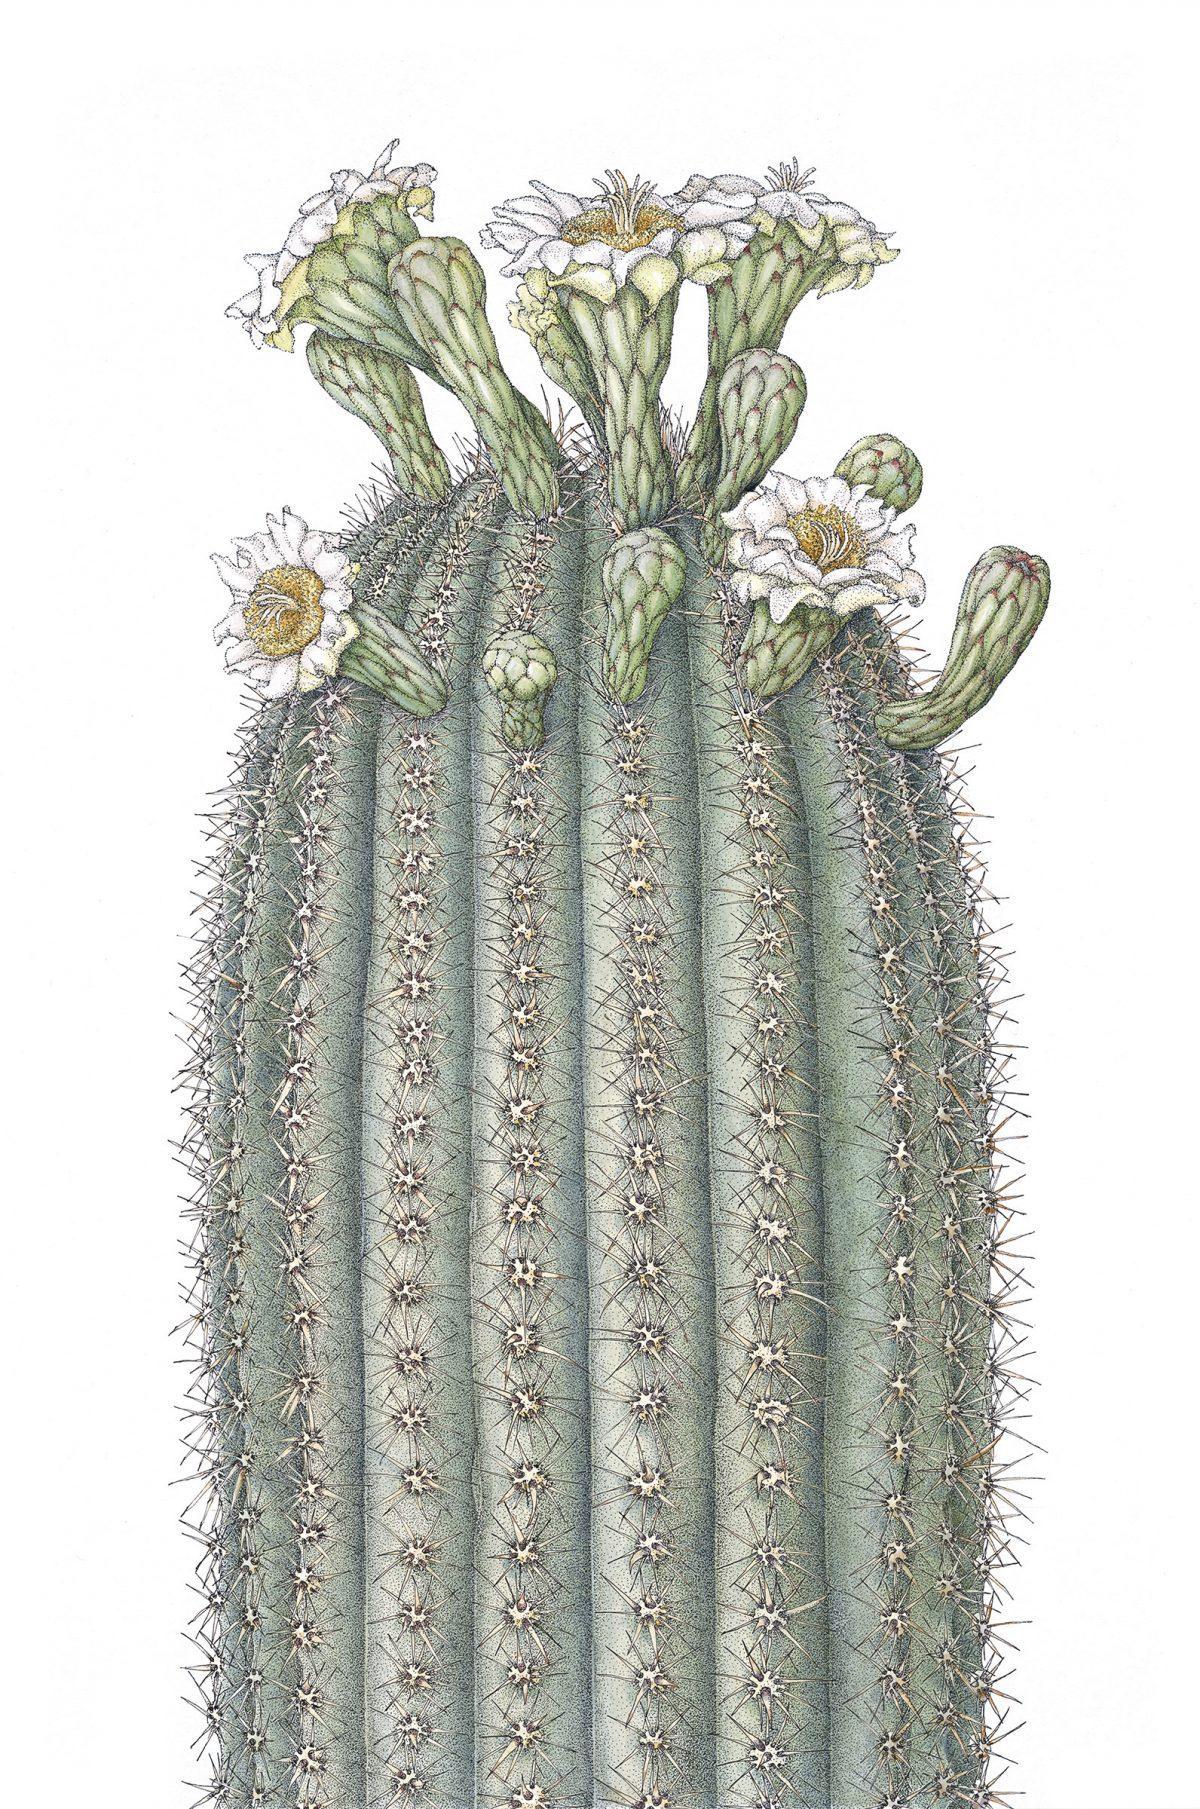 "Saguaro (Carnegiea gigantea)," by Joan McGann. Ink and watercolor on paper,18 inches by 12 inches. (Joan McGann)